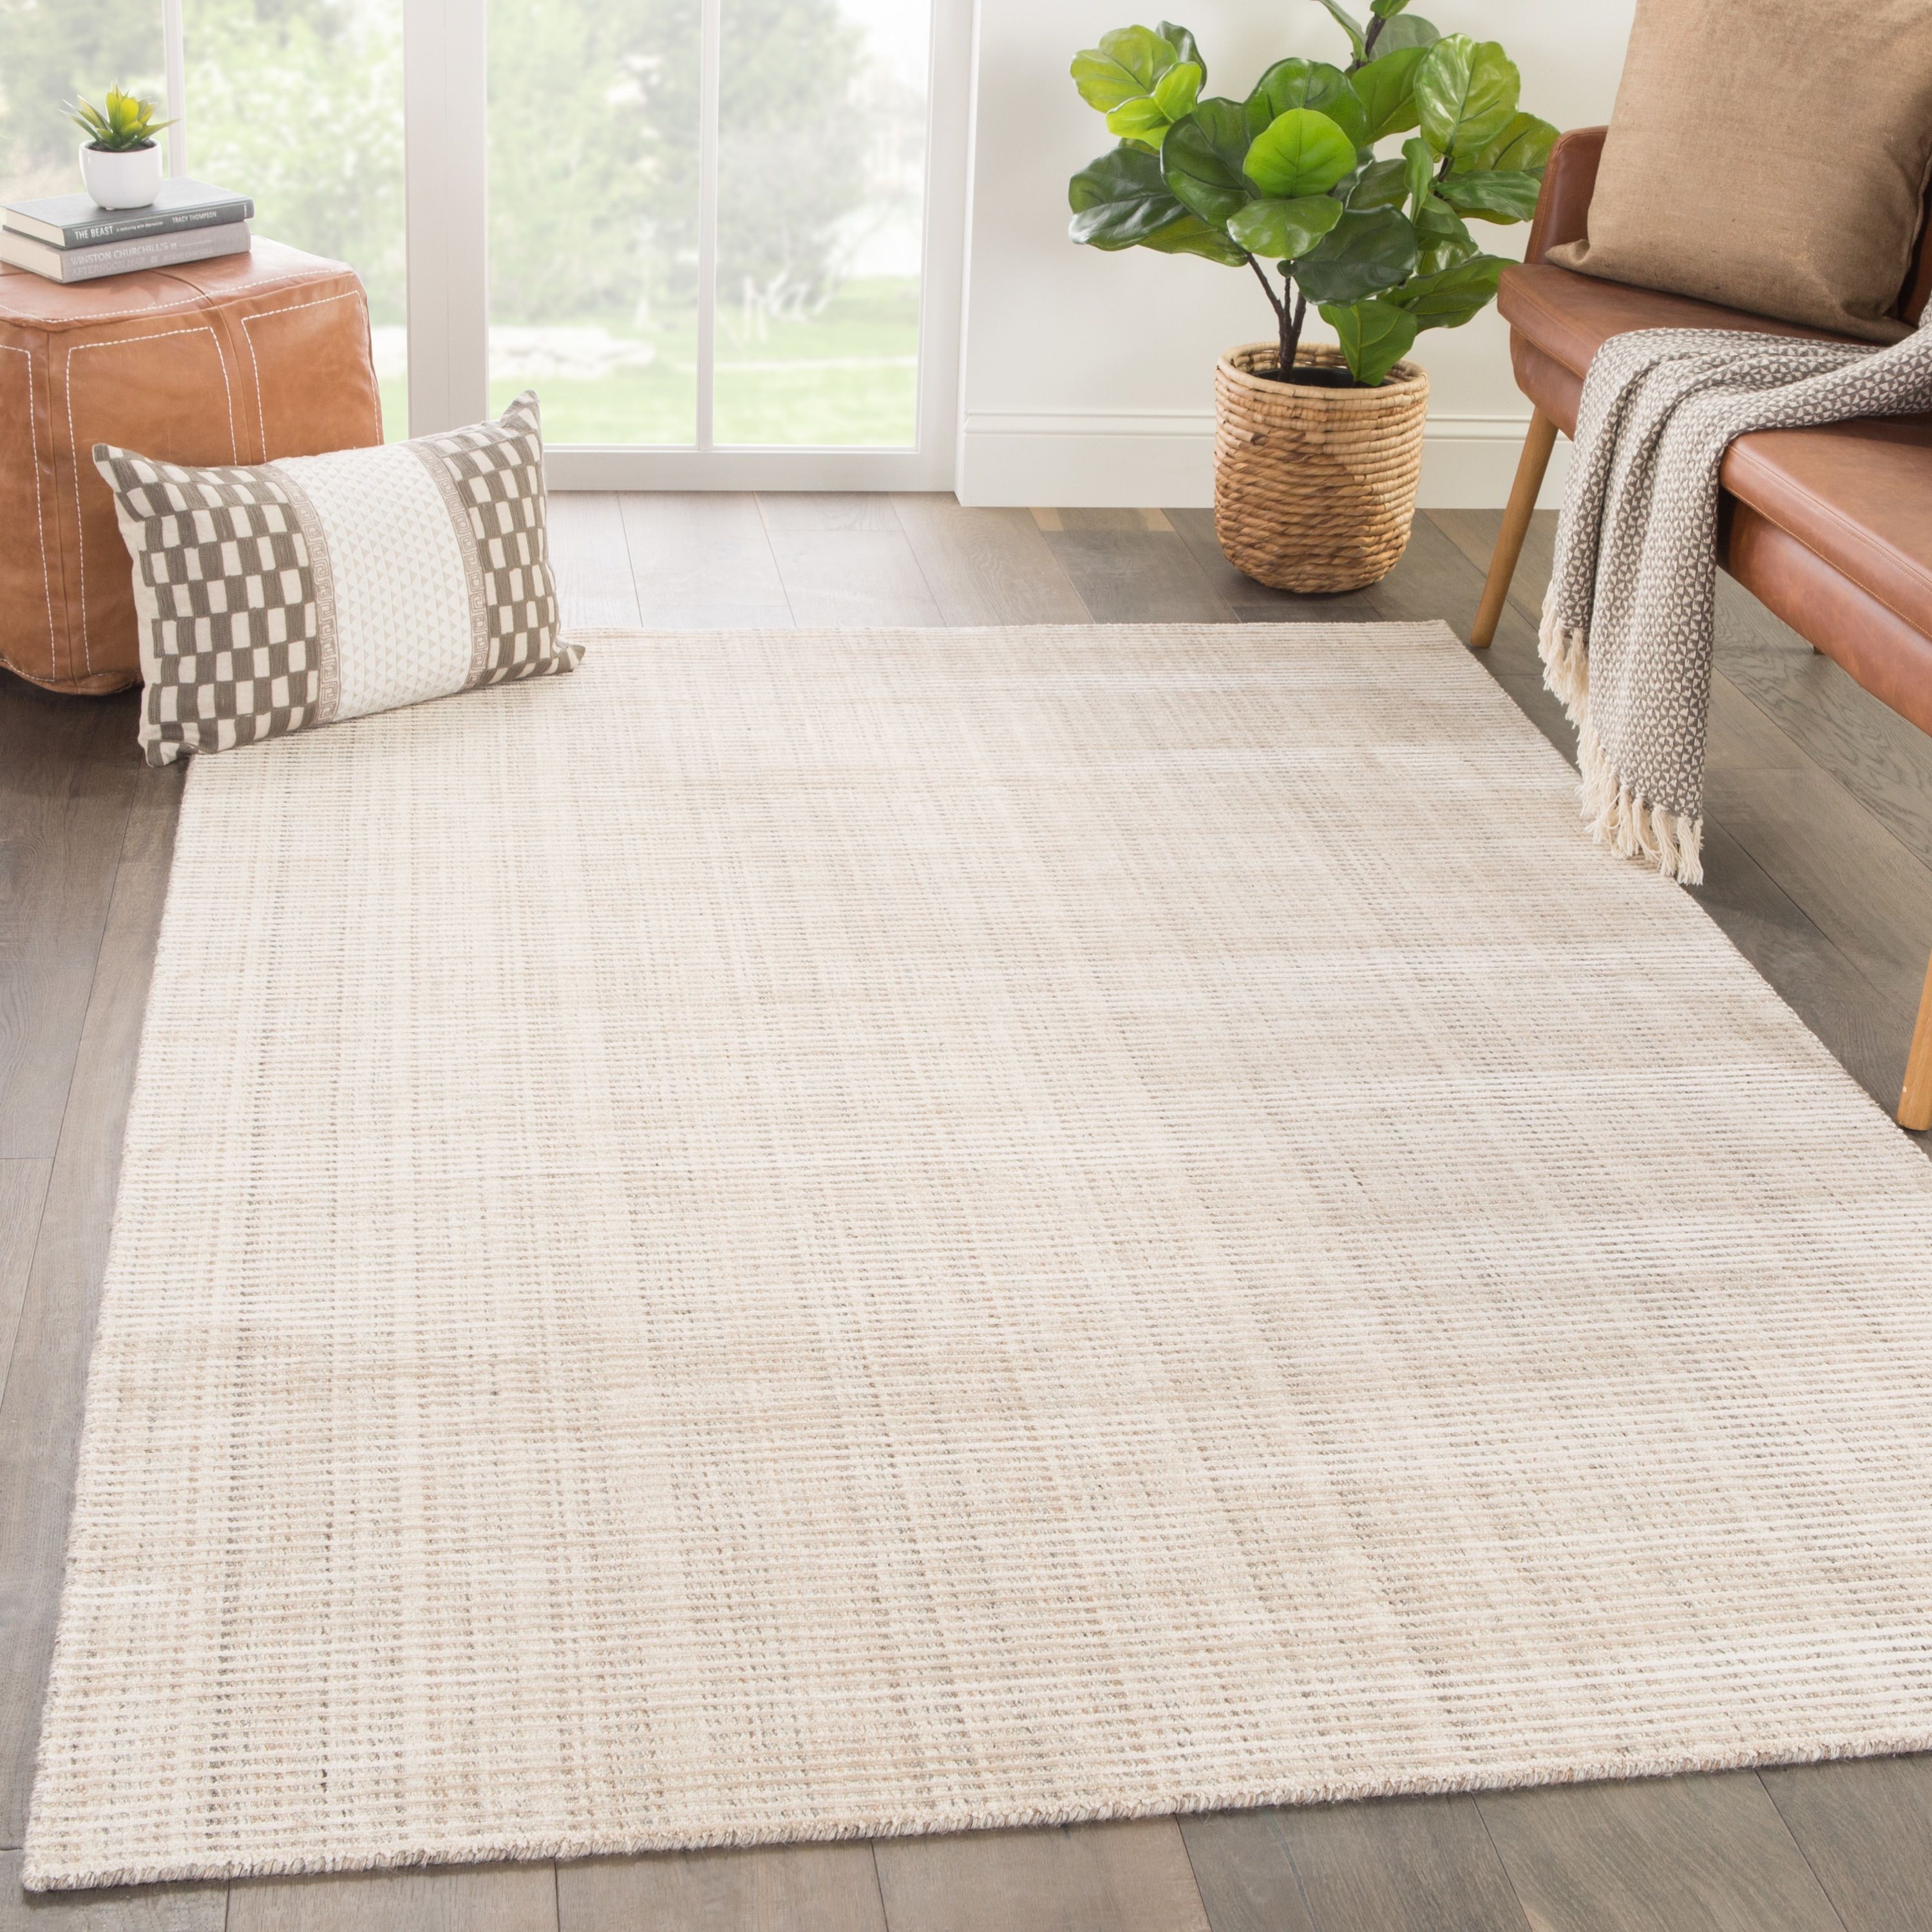 Phase Handmade Solid Ivory/ Beige Area Rug (8Undefined X 10Undefined) –  7Undefined10" X 9Undefined10" – Overstock – 20582652 With Ivory Beige Rugs (Photo 4 of 15)